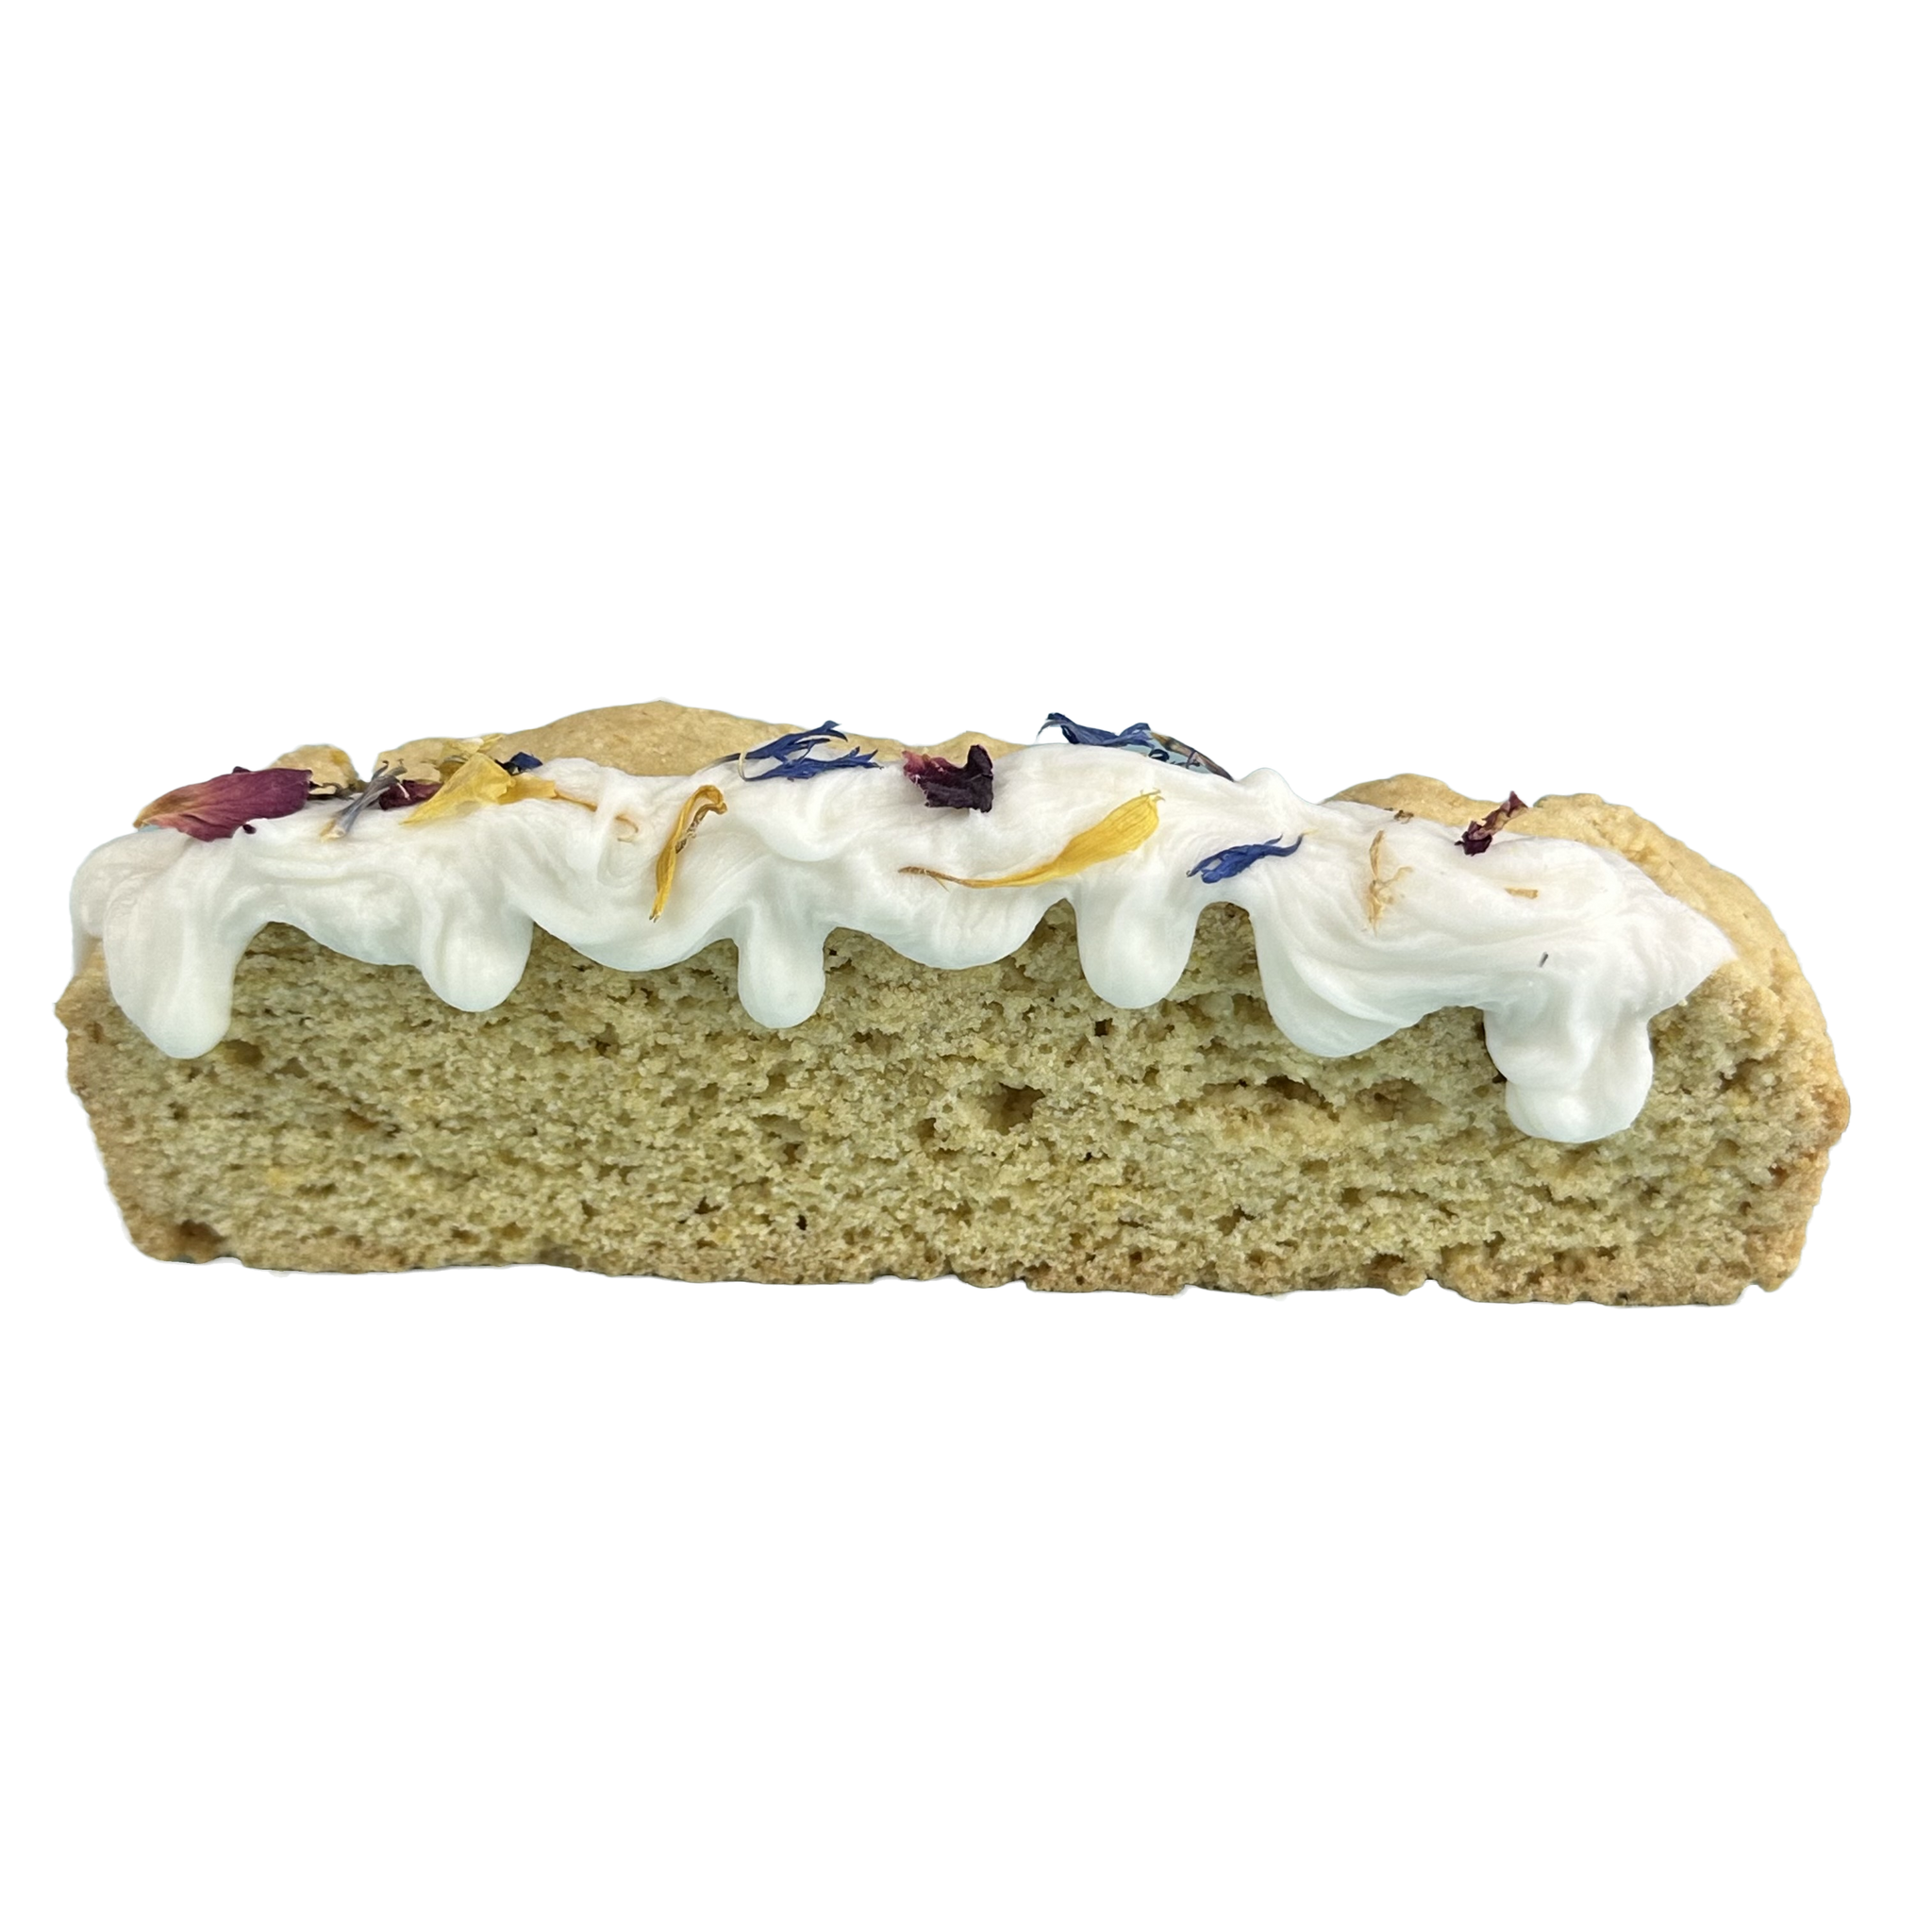 Lemon Biscotti - Decorated with white chocolate and edible flowers